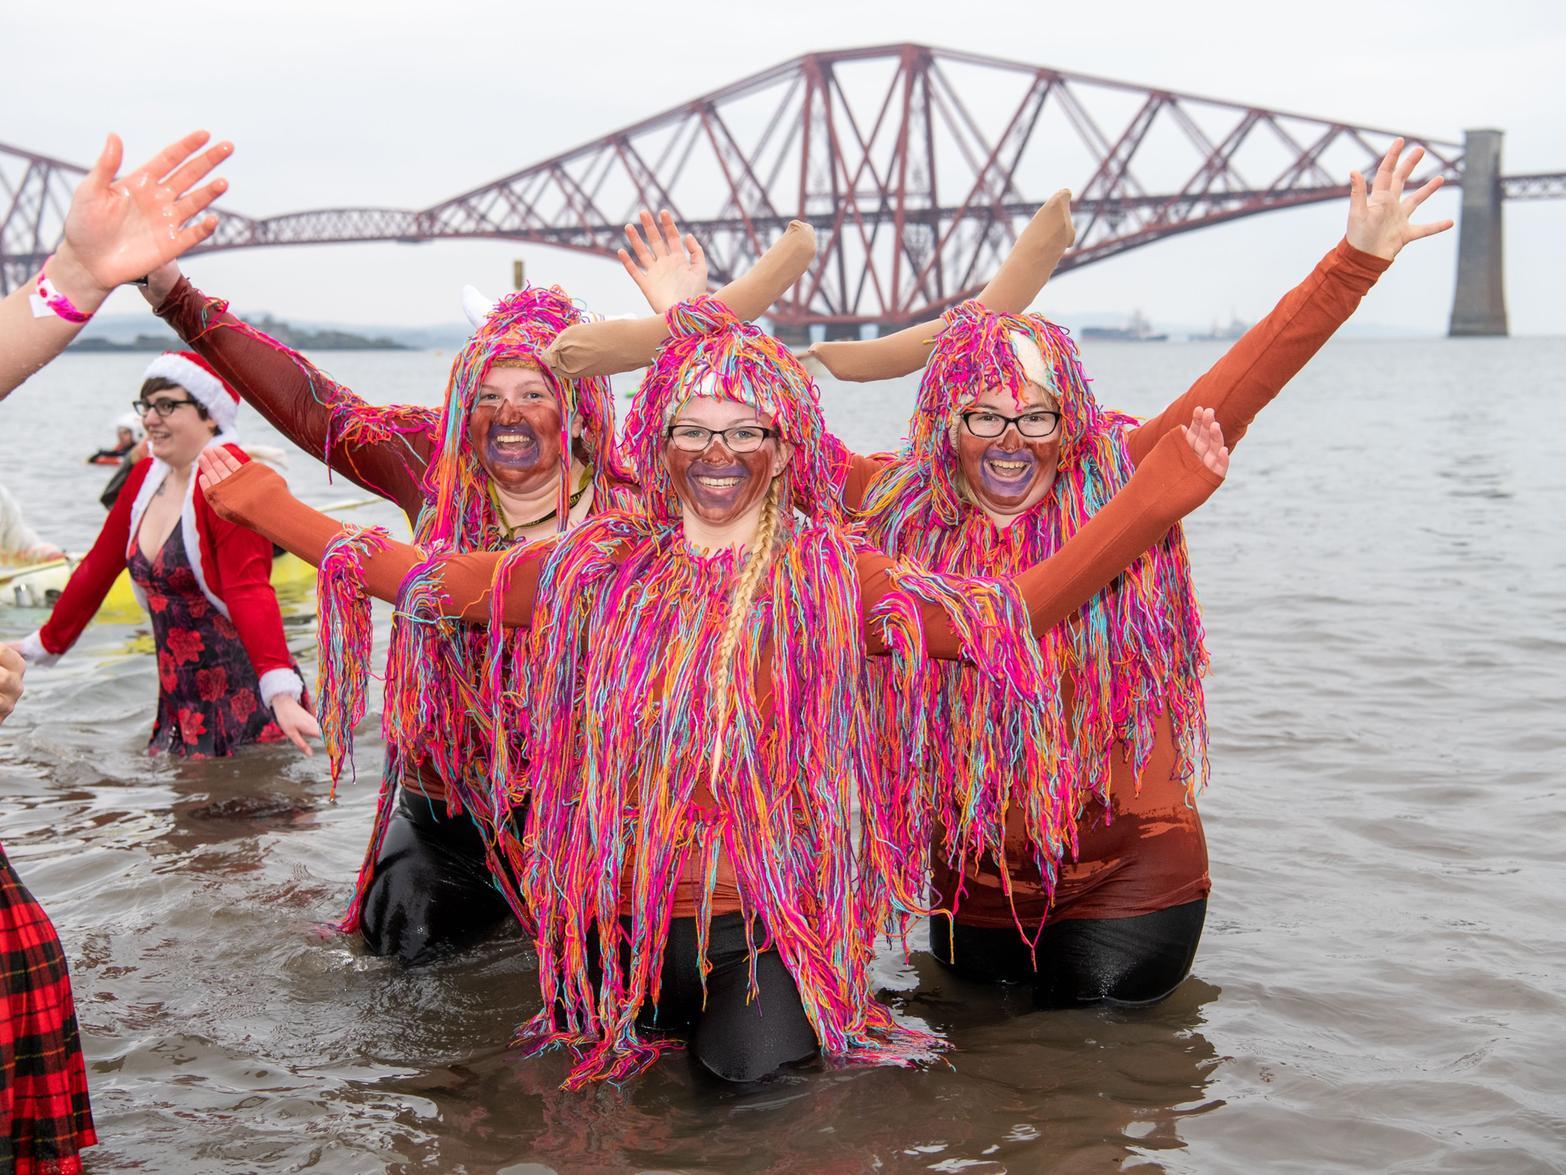 The Loony Dook was one of the final events to be held as part of Edinburgh's three-day Hogmanay festival, which organisers said was expected to have attracted more than 180,000 attendees.